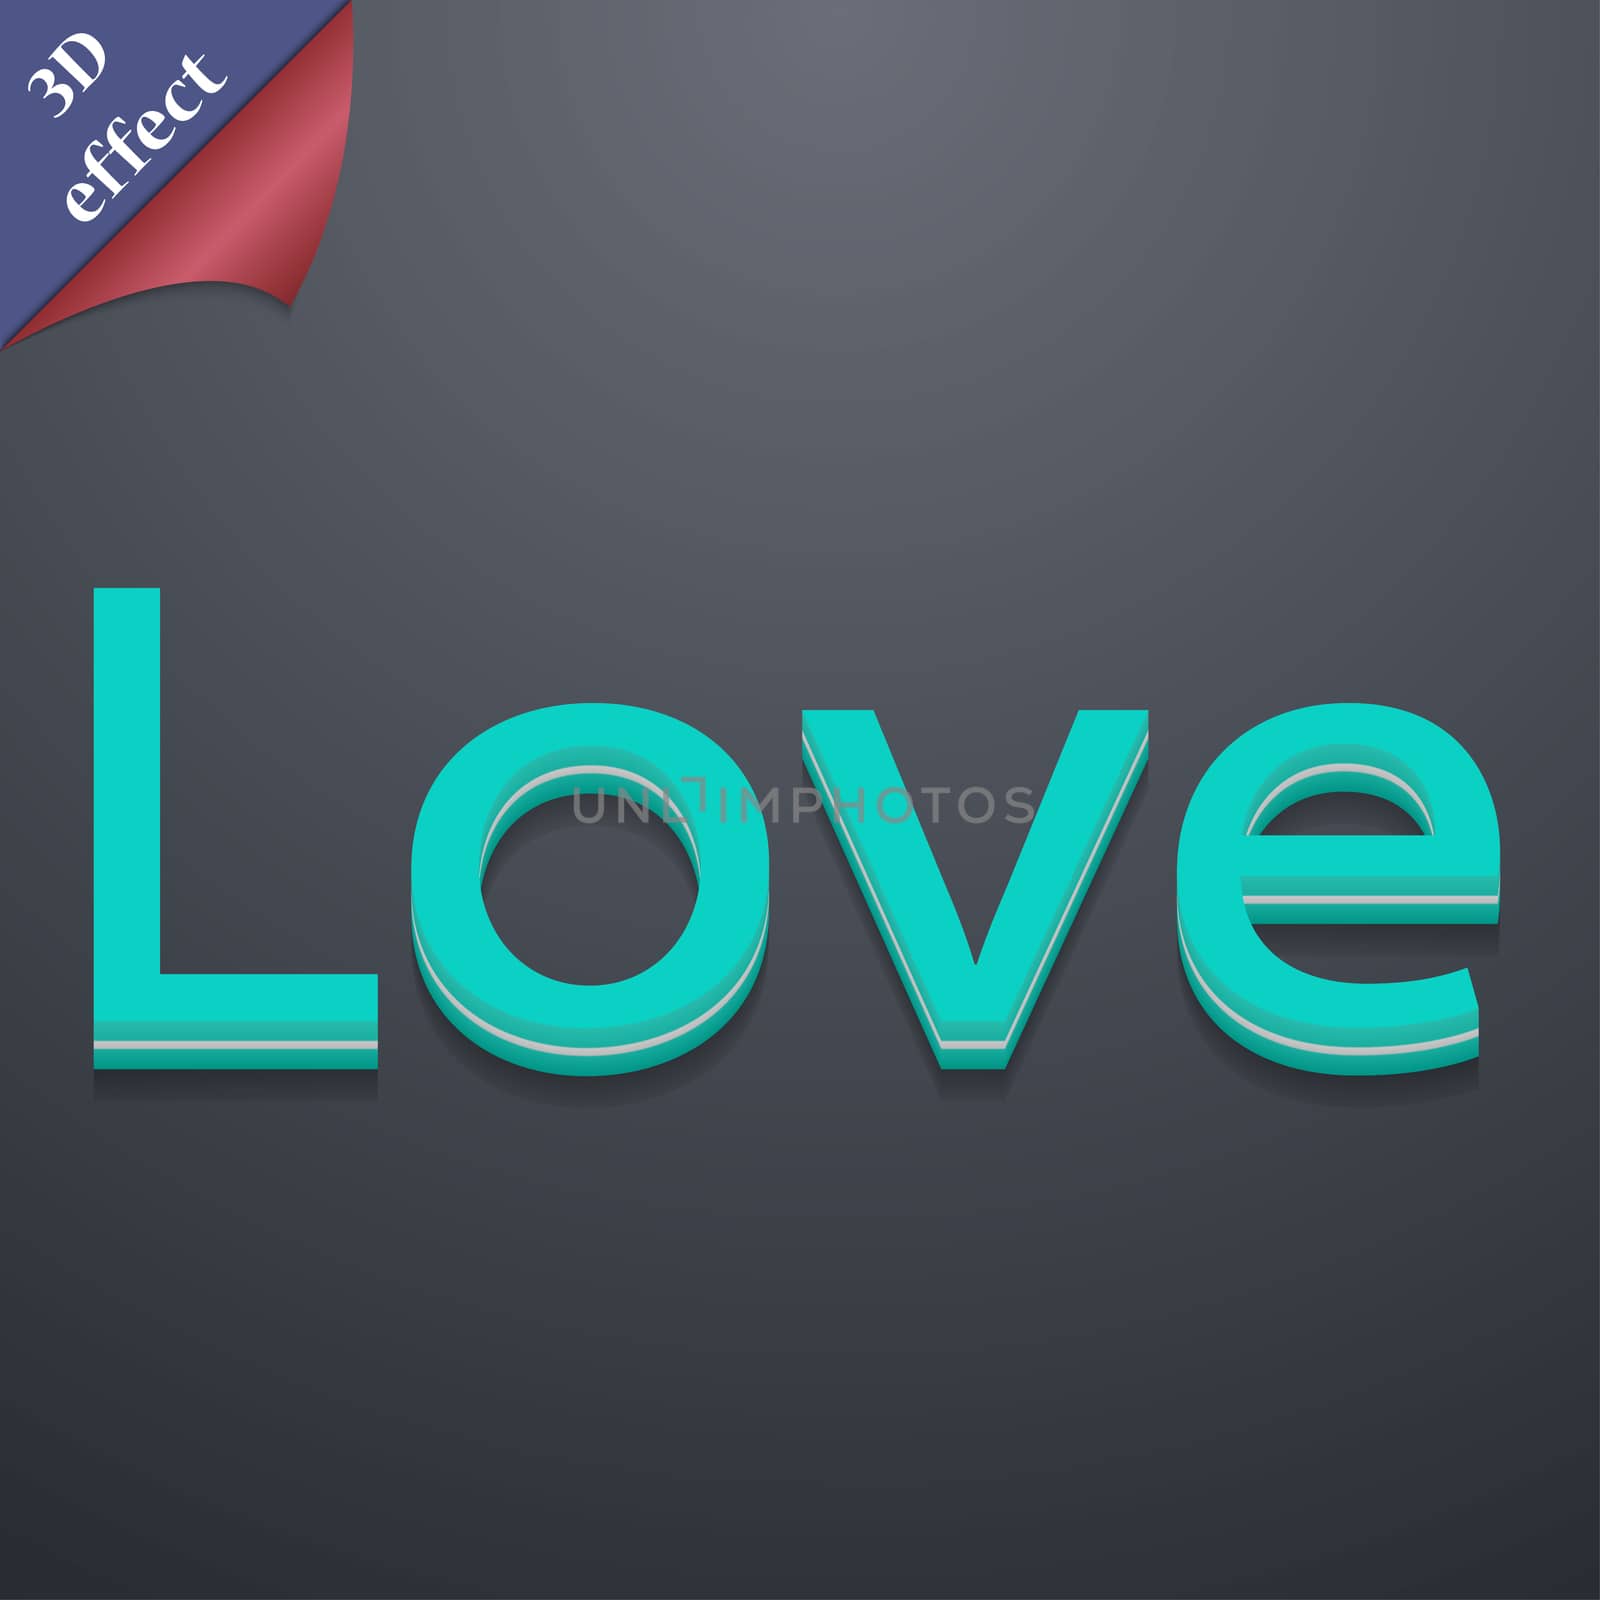 Love you icon symbol. 3D style. Trendy, modern design with space for your text illustration. Rastrized copy